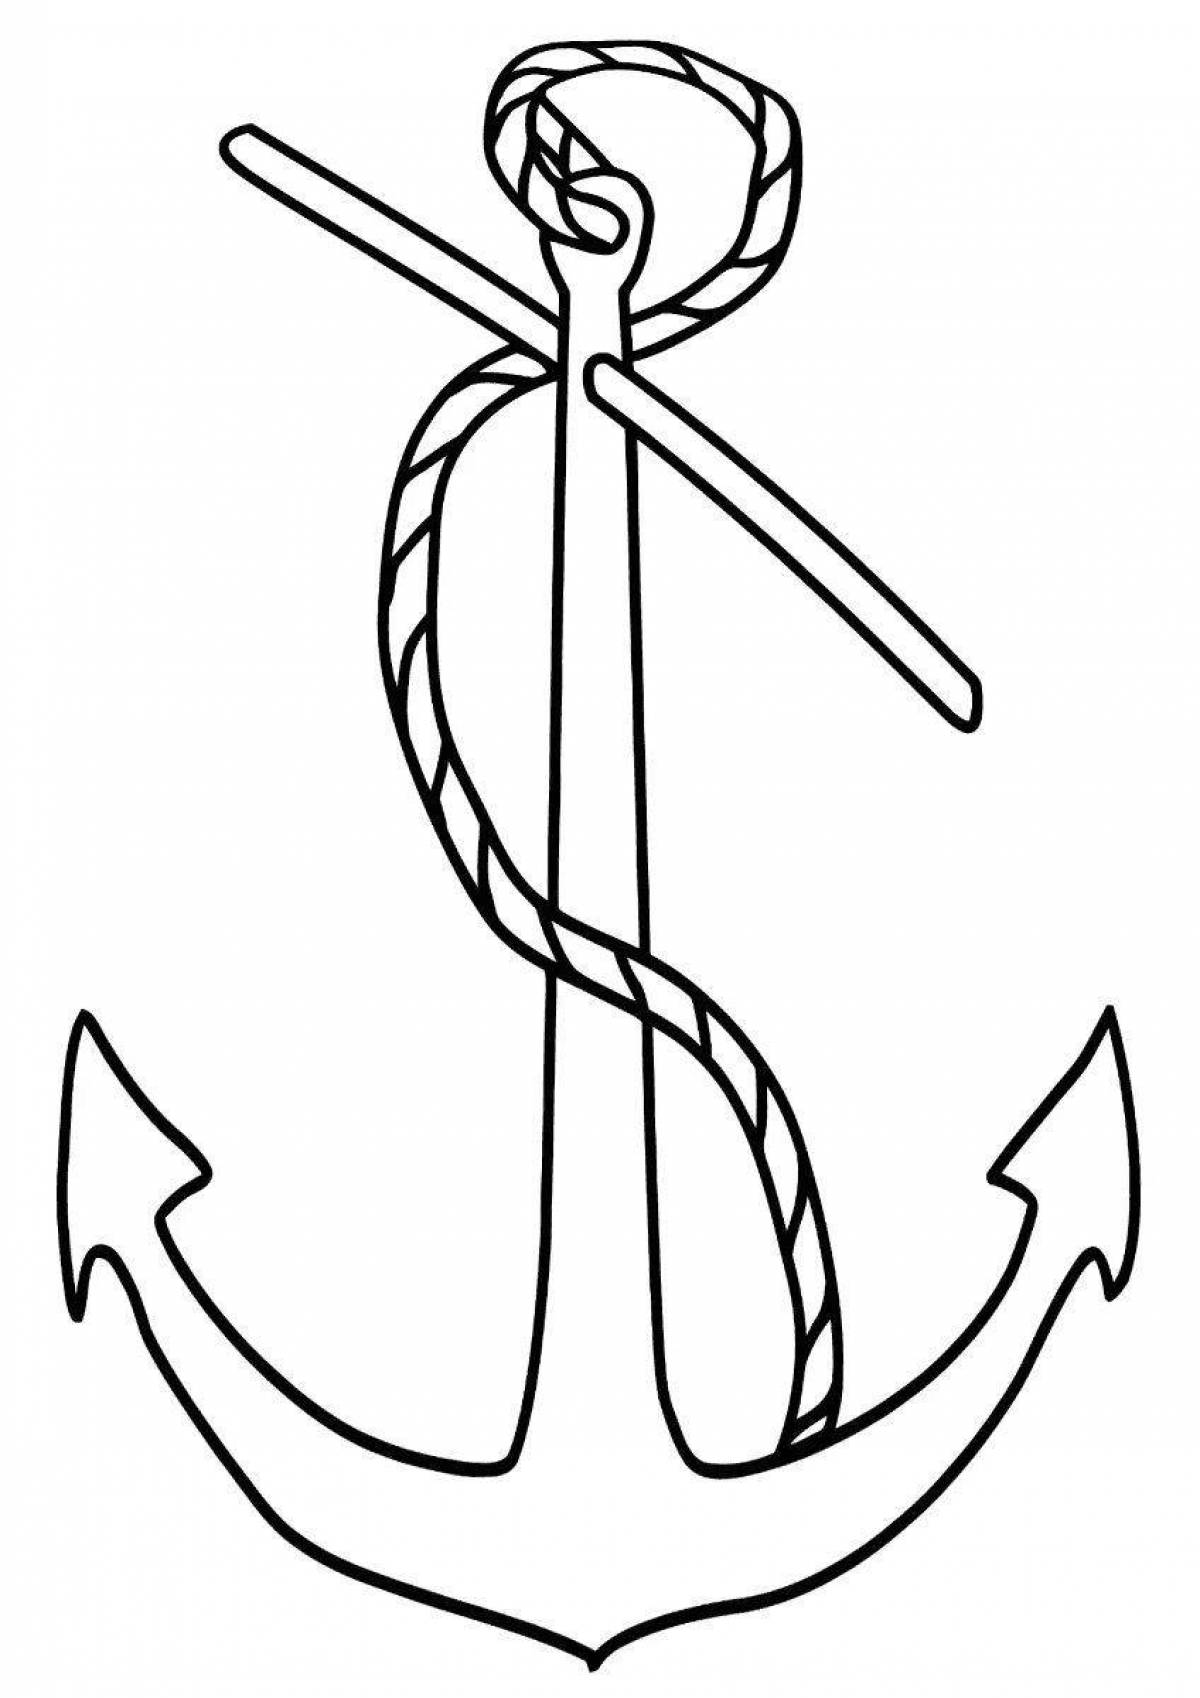 Colorful anchor coloring page for kids